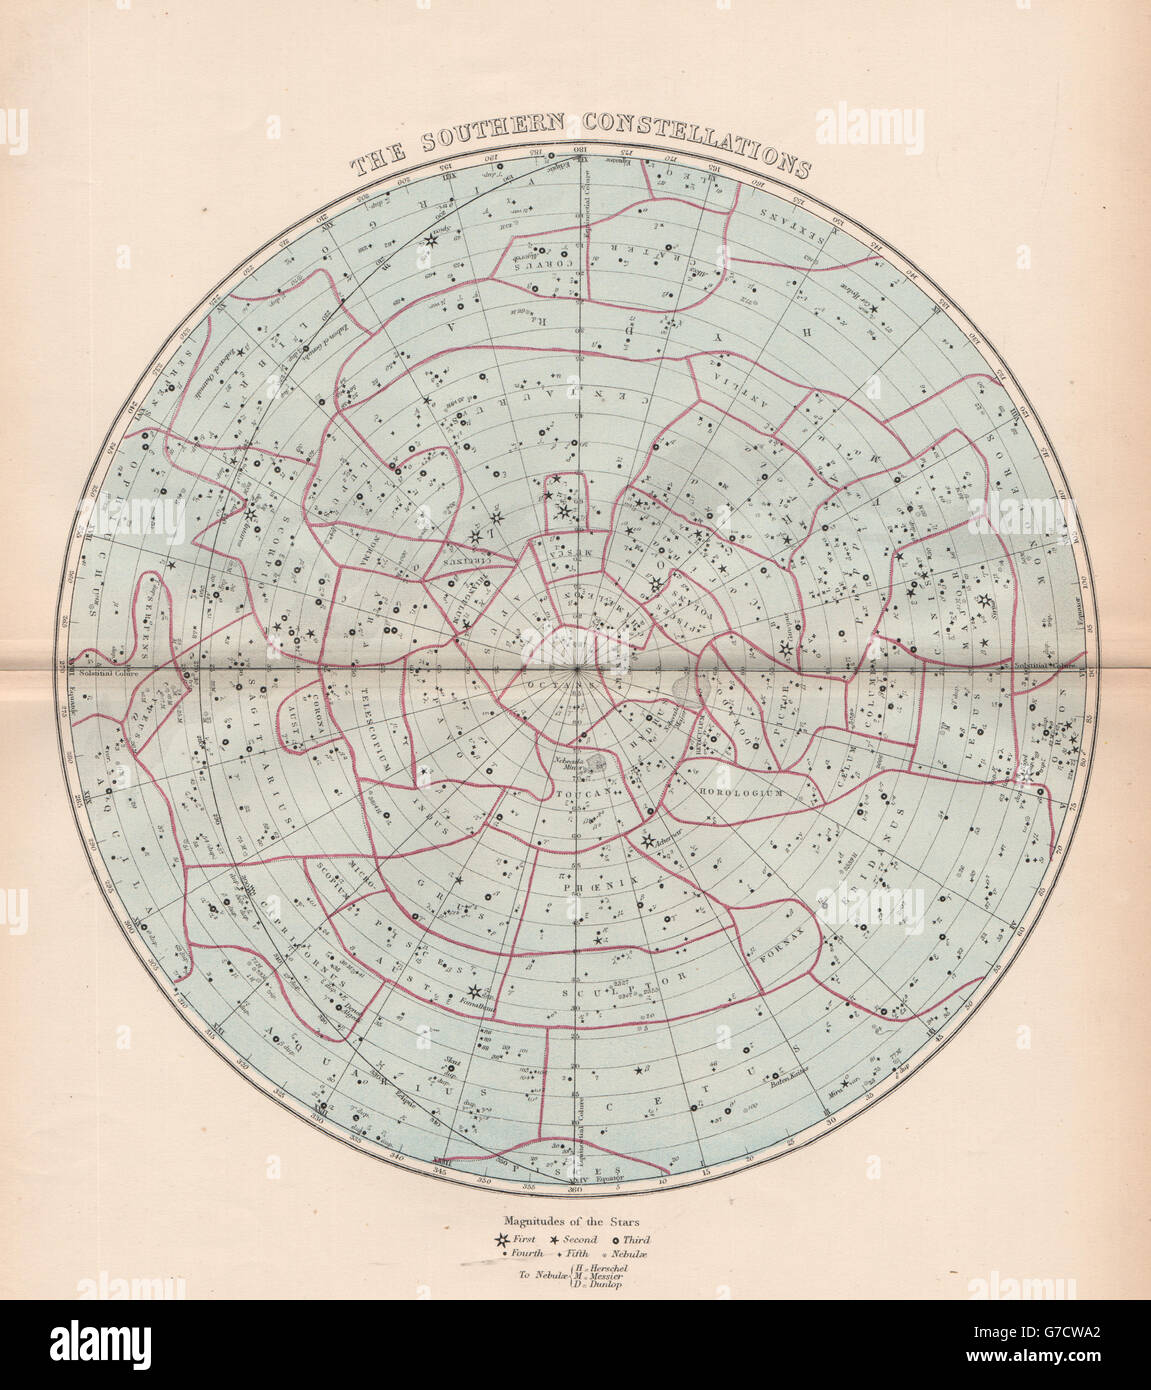 STAR CHART. 'The Southern Constellations'. Showing star magnitudes, 1878 map Stock Photo